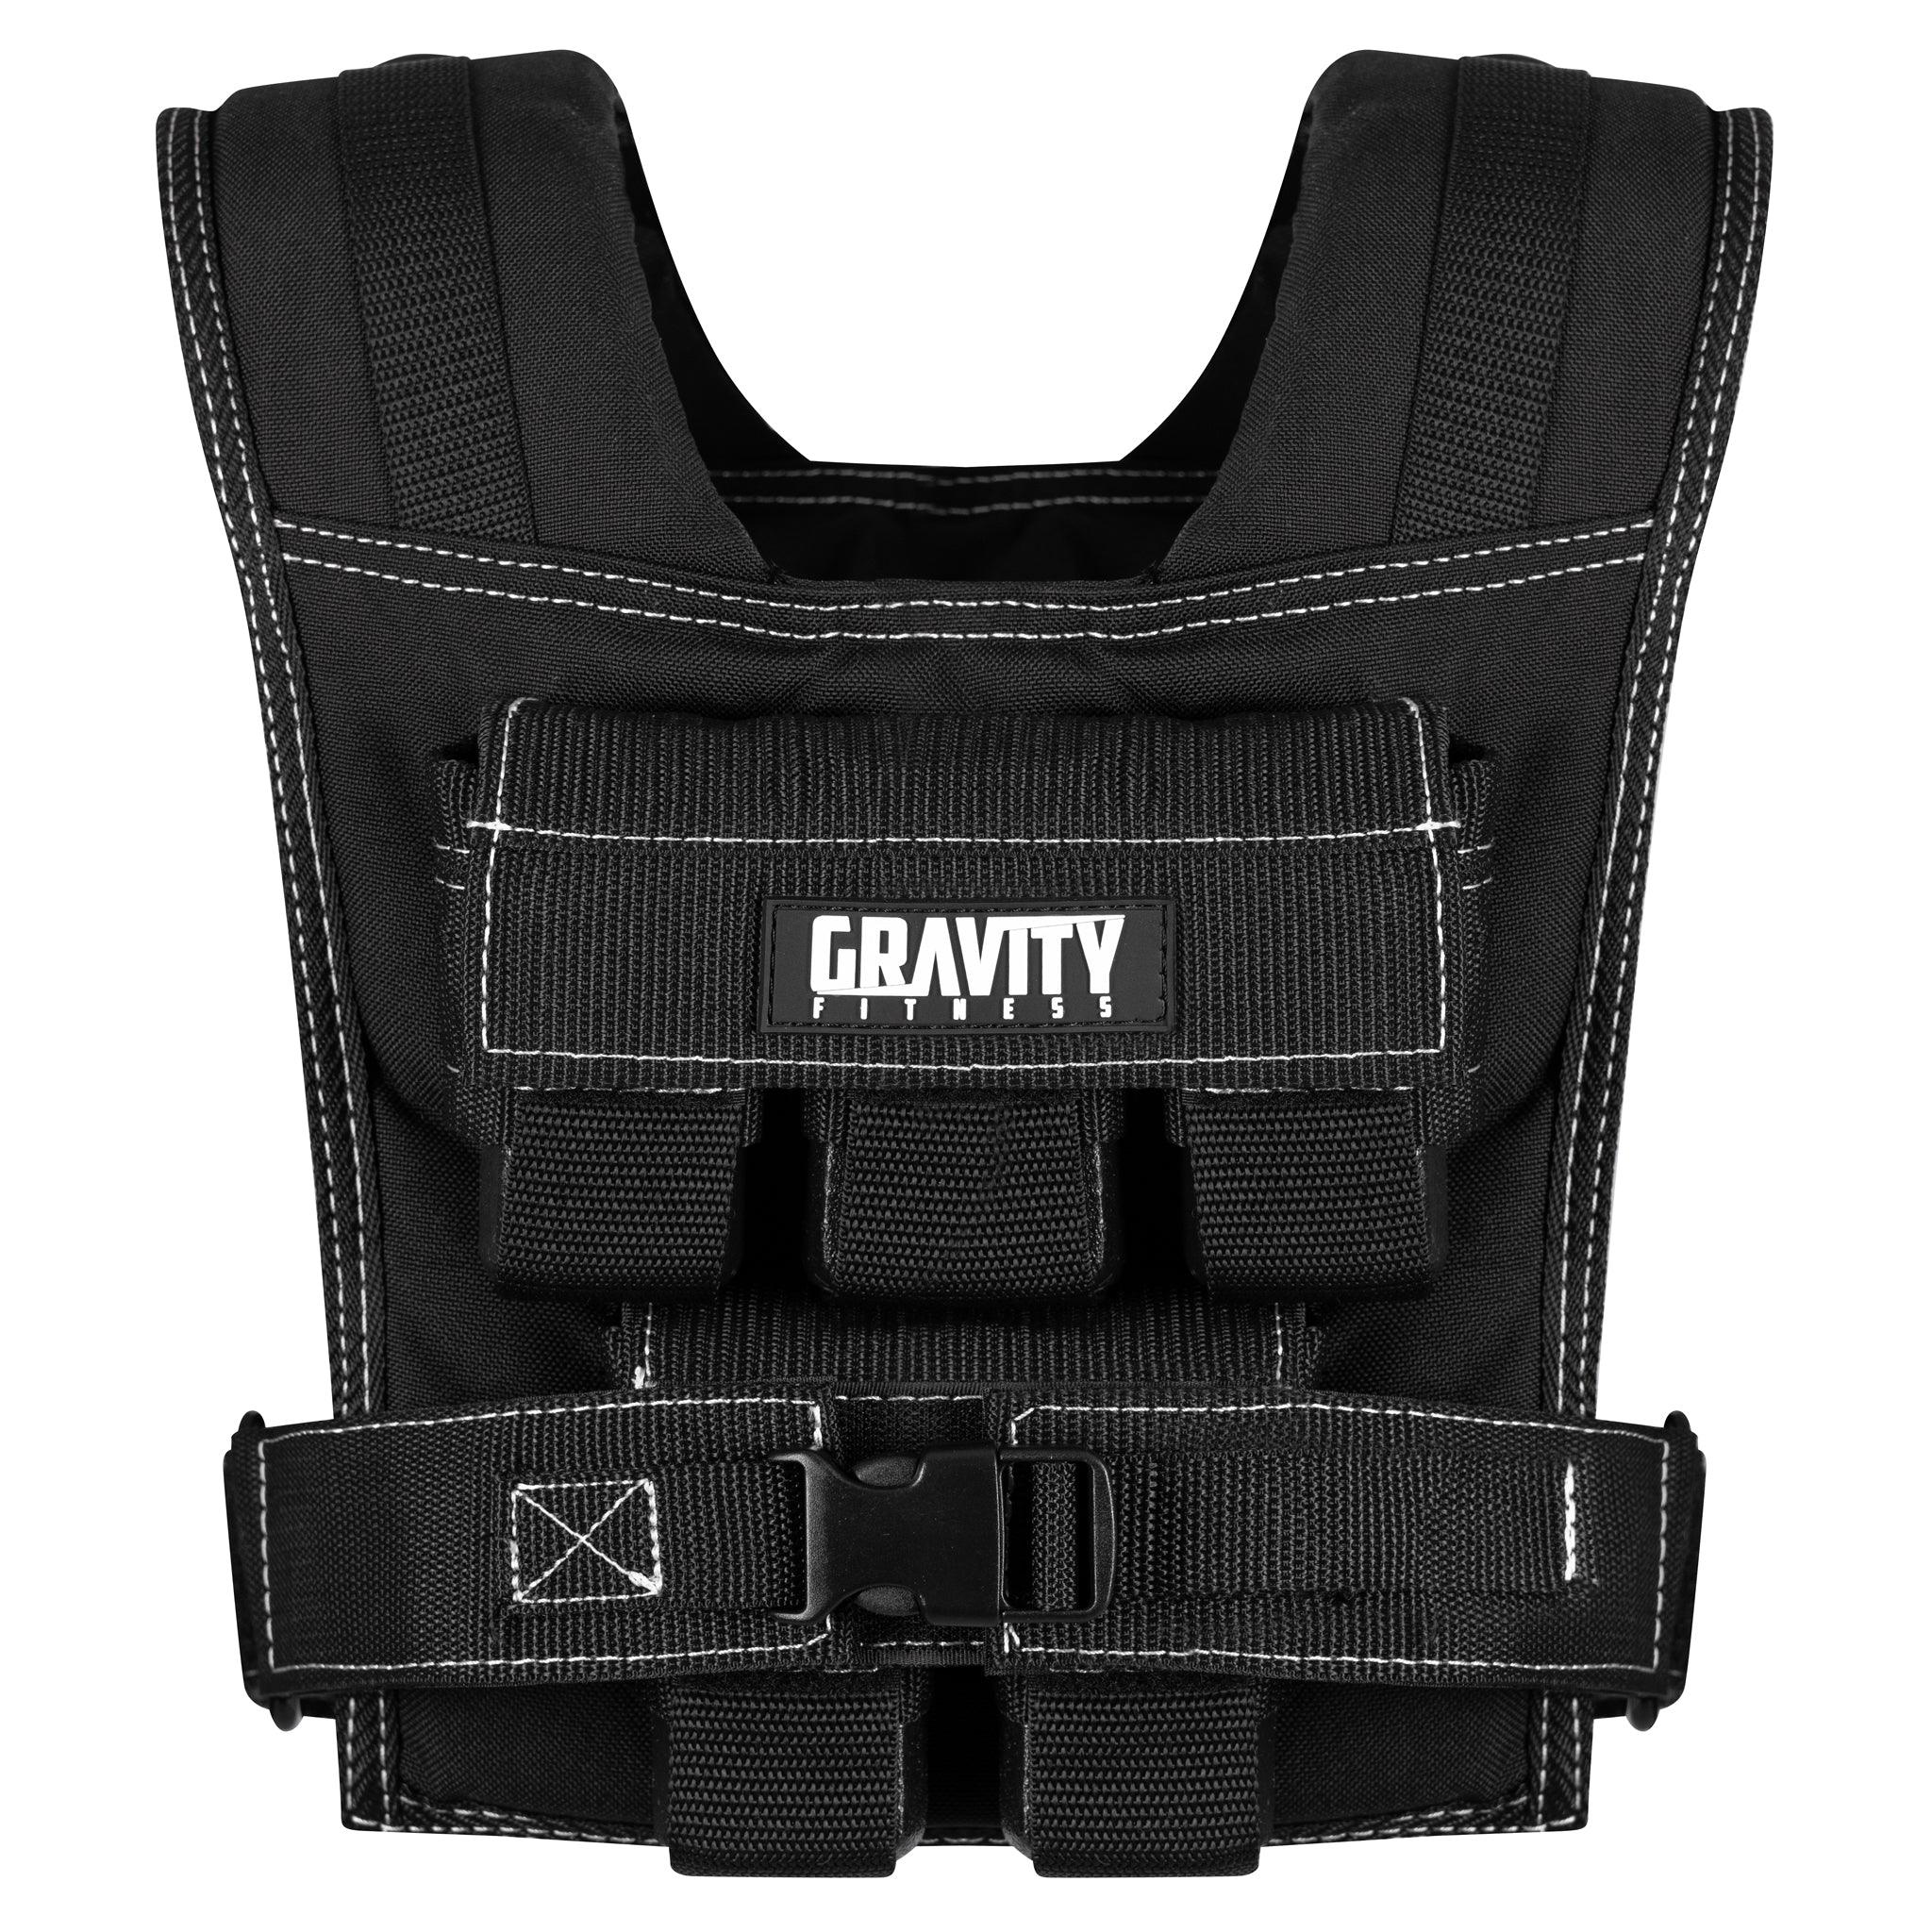 Weighted Weight Vest Adjustable Training Fitness Workout Strength Exercise